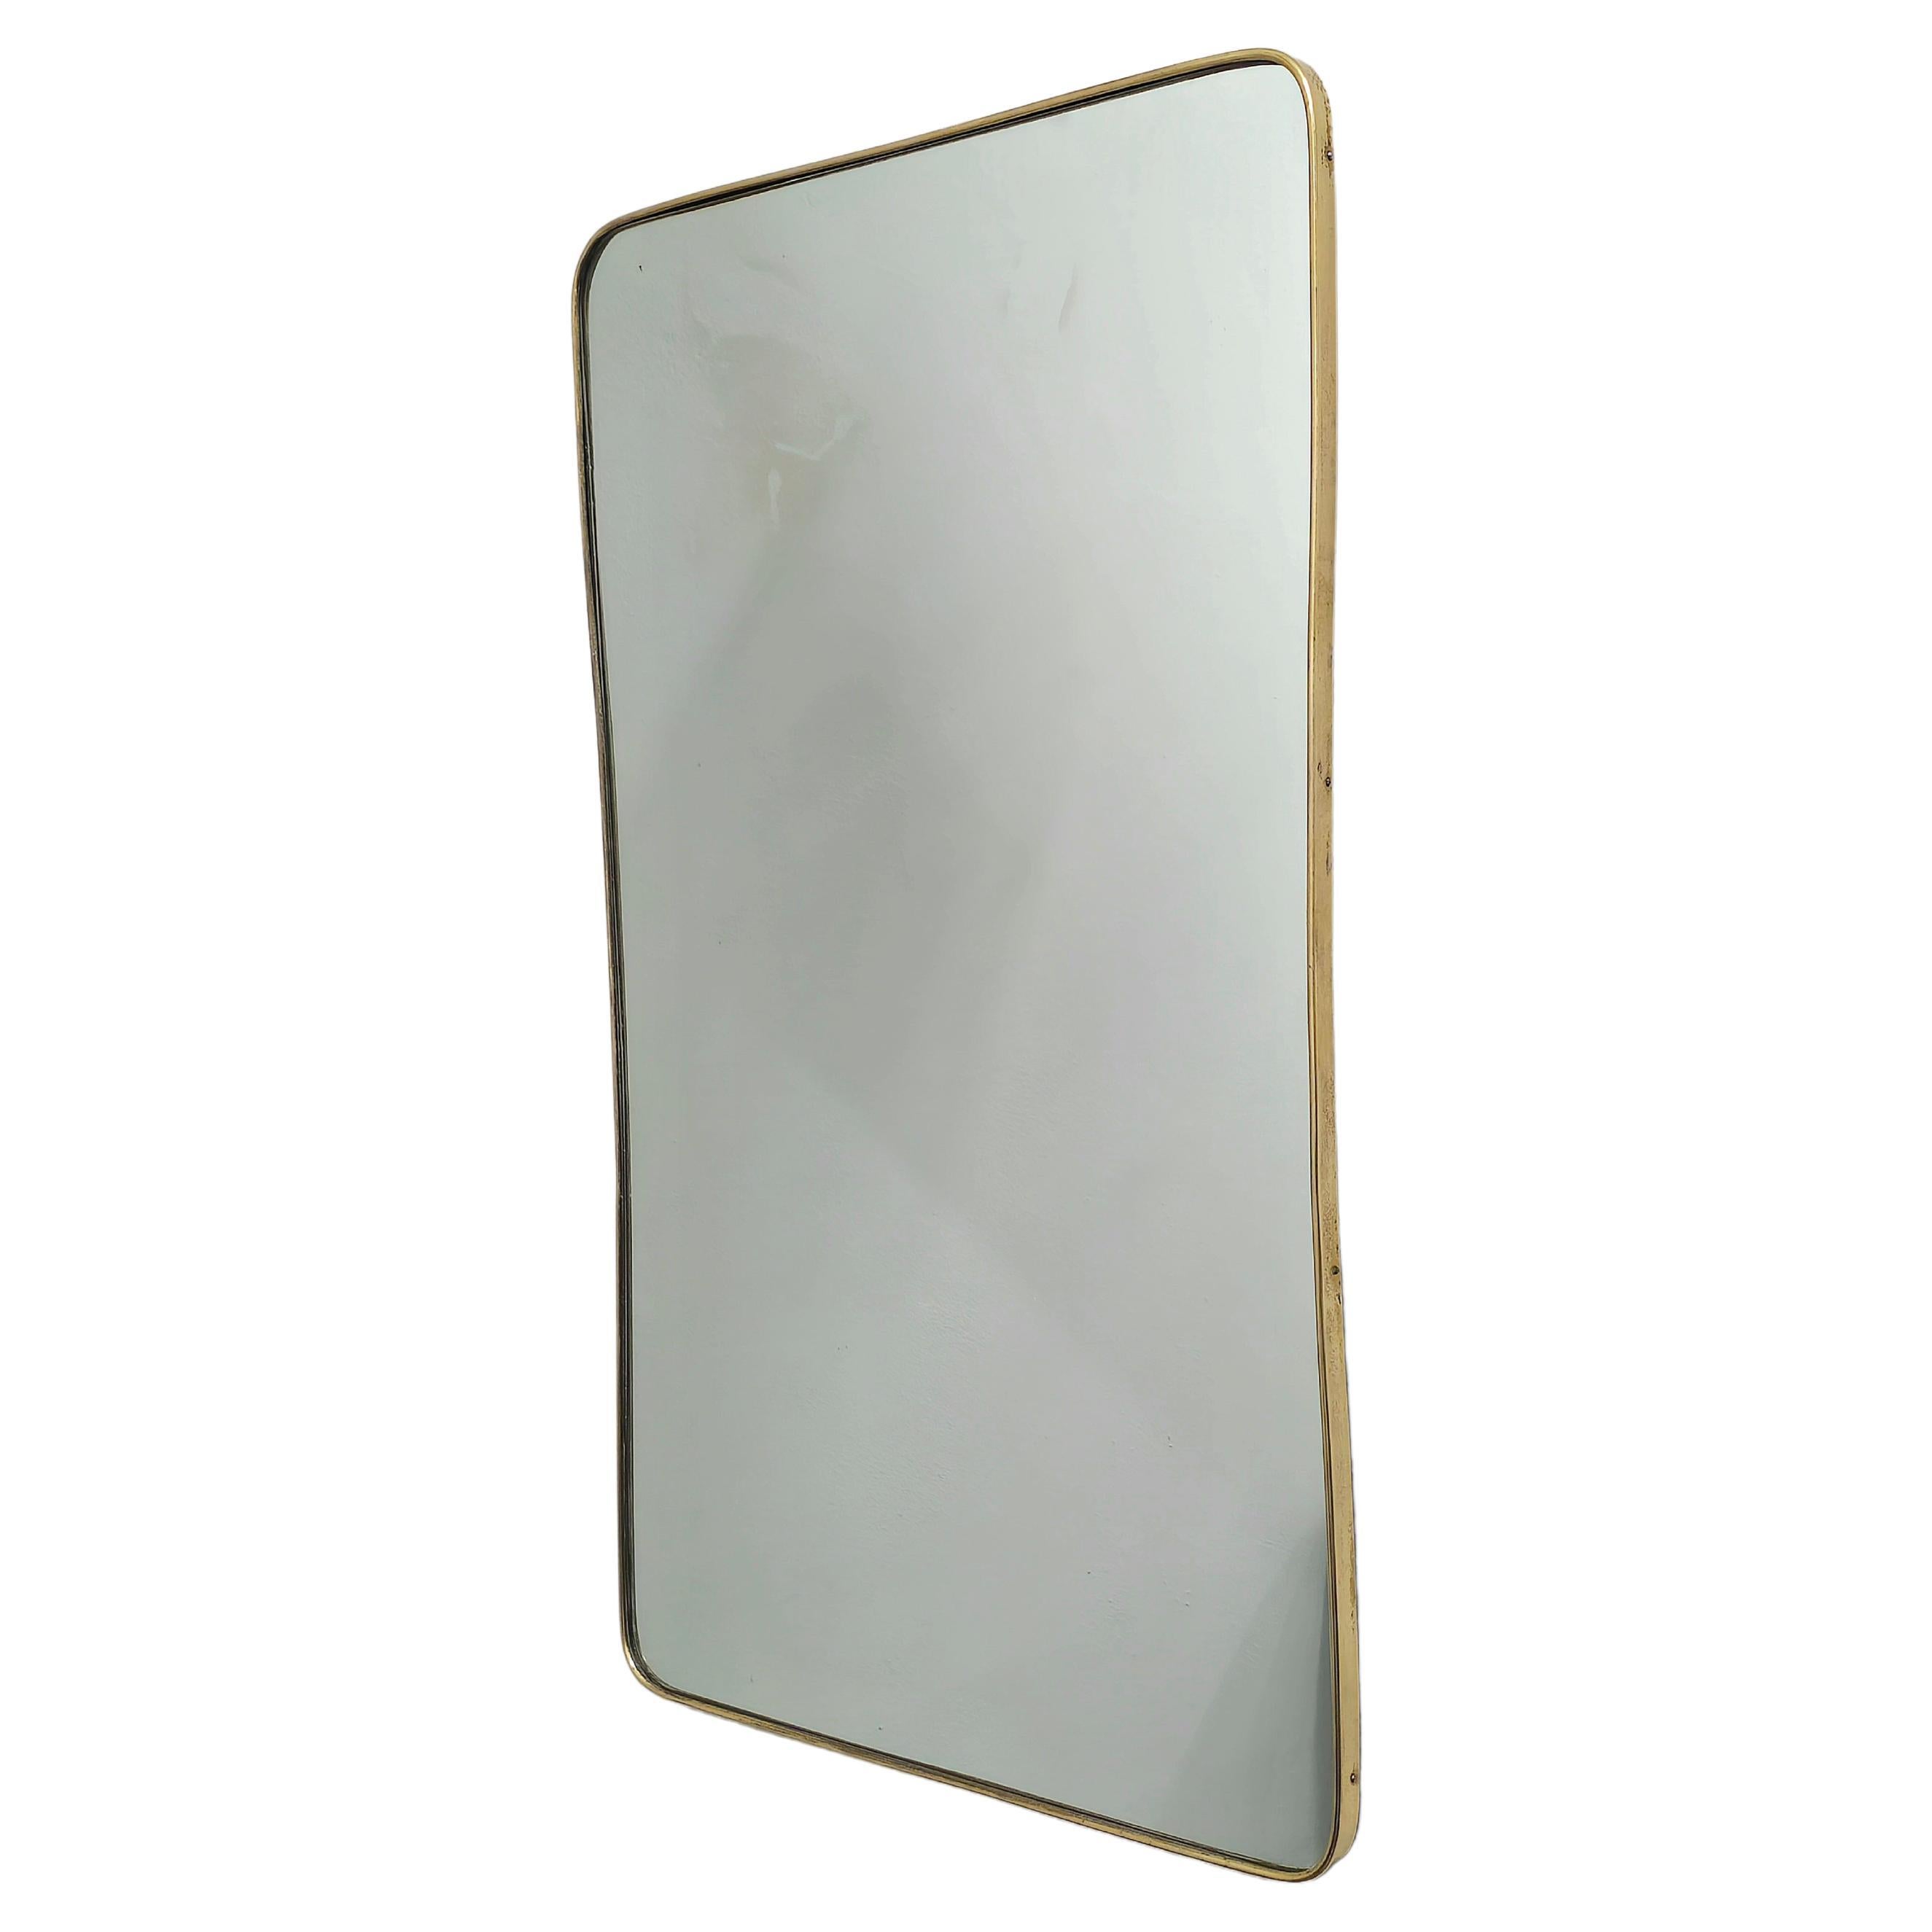 Attributable to Gio Ponti, Italy, 1950s.
Wall mirror of considerable size, rectangular shape in mirrored glass and brass frame with internally curved sides and rounded corners.
We recommend this piece for its elegance and its shapes.


Note: We try